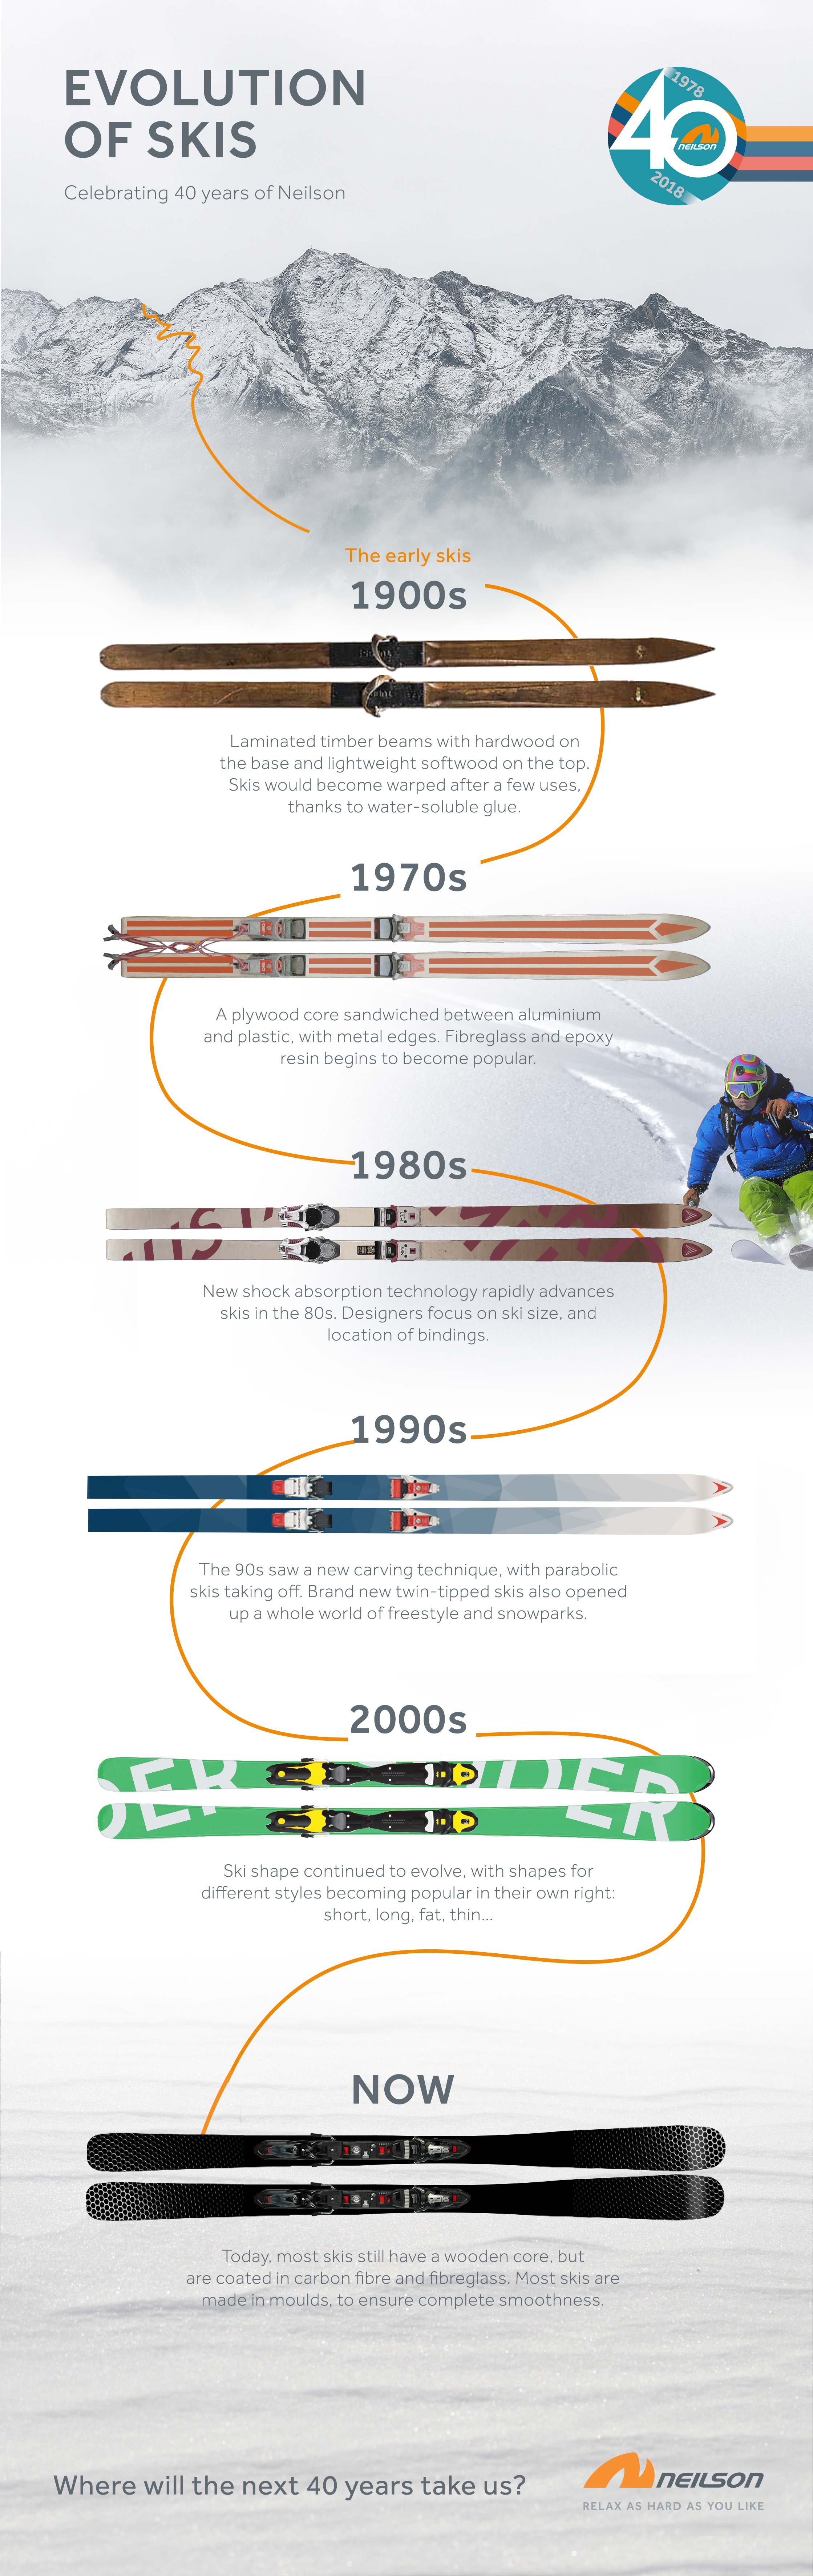 Did You Know Skis Have Been Around for Thousands of Years?